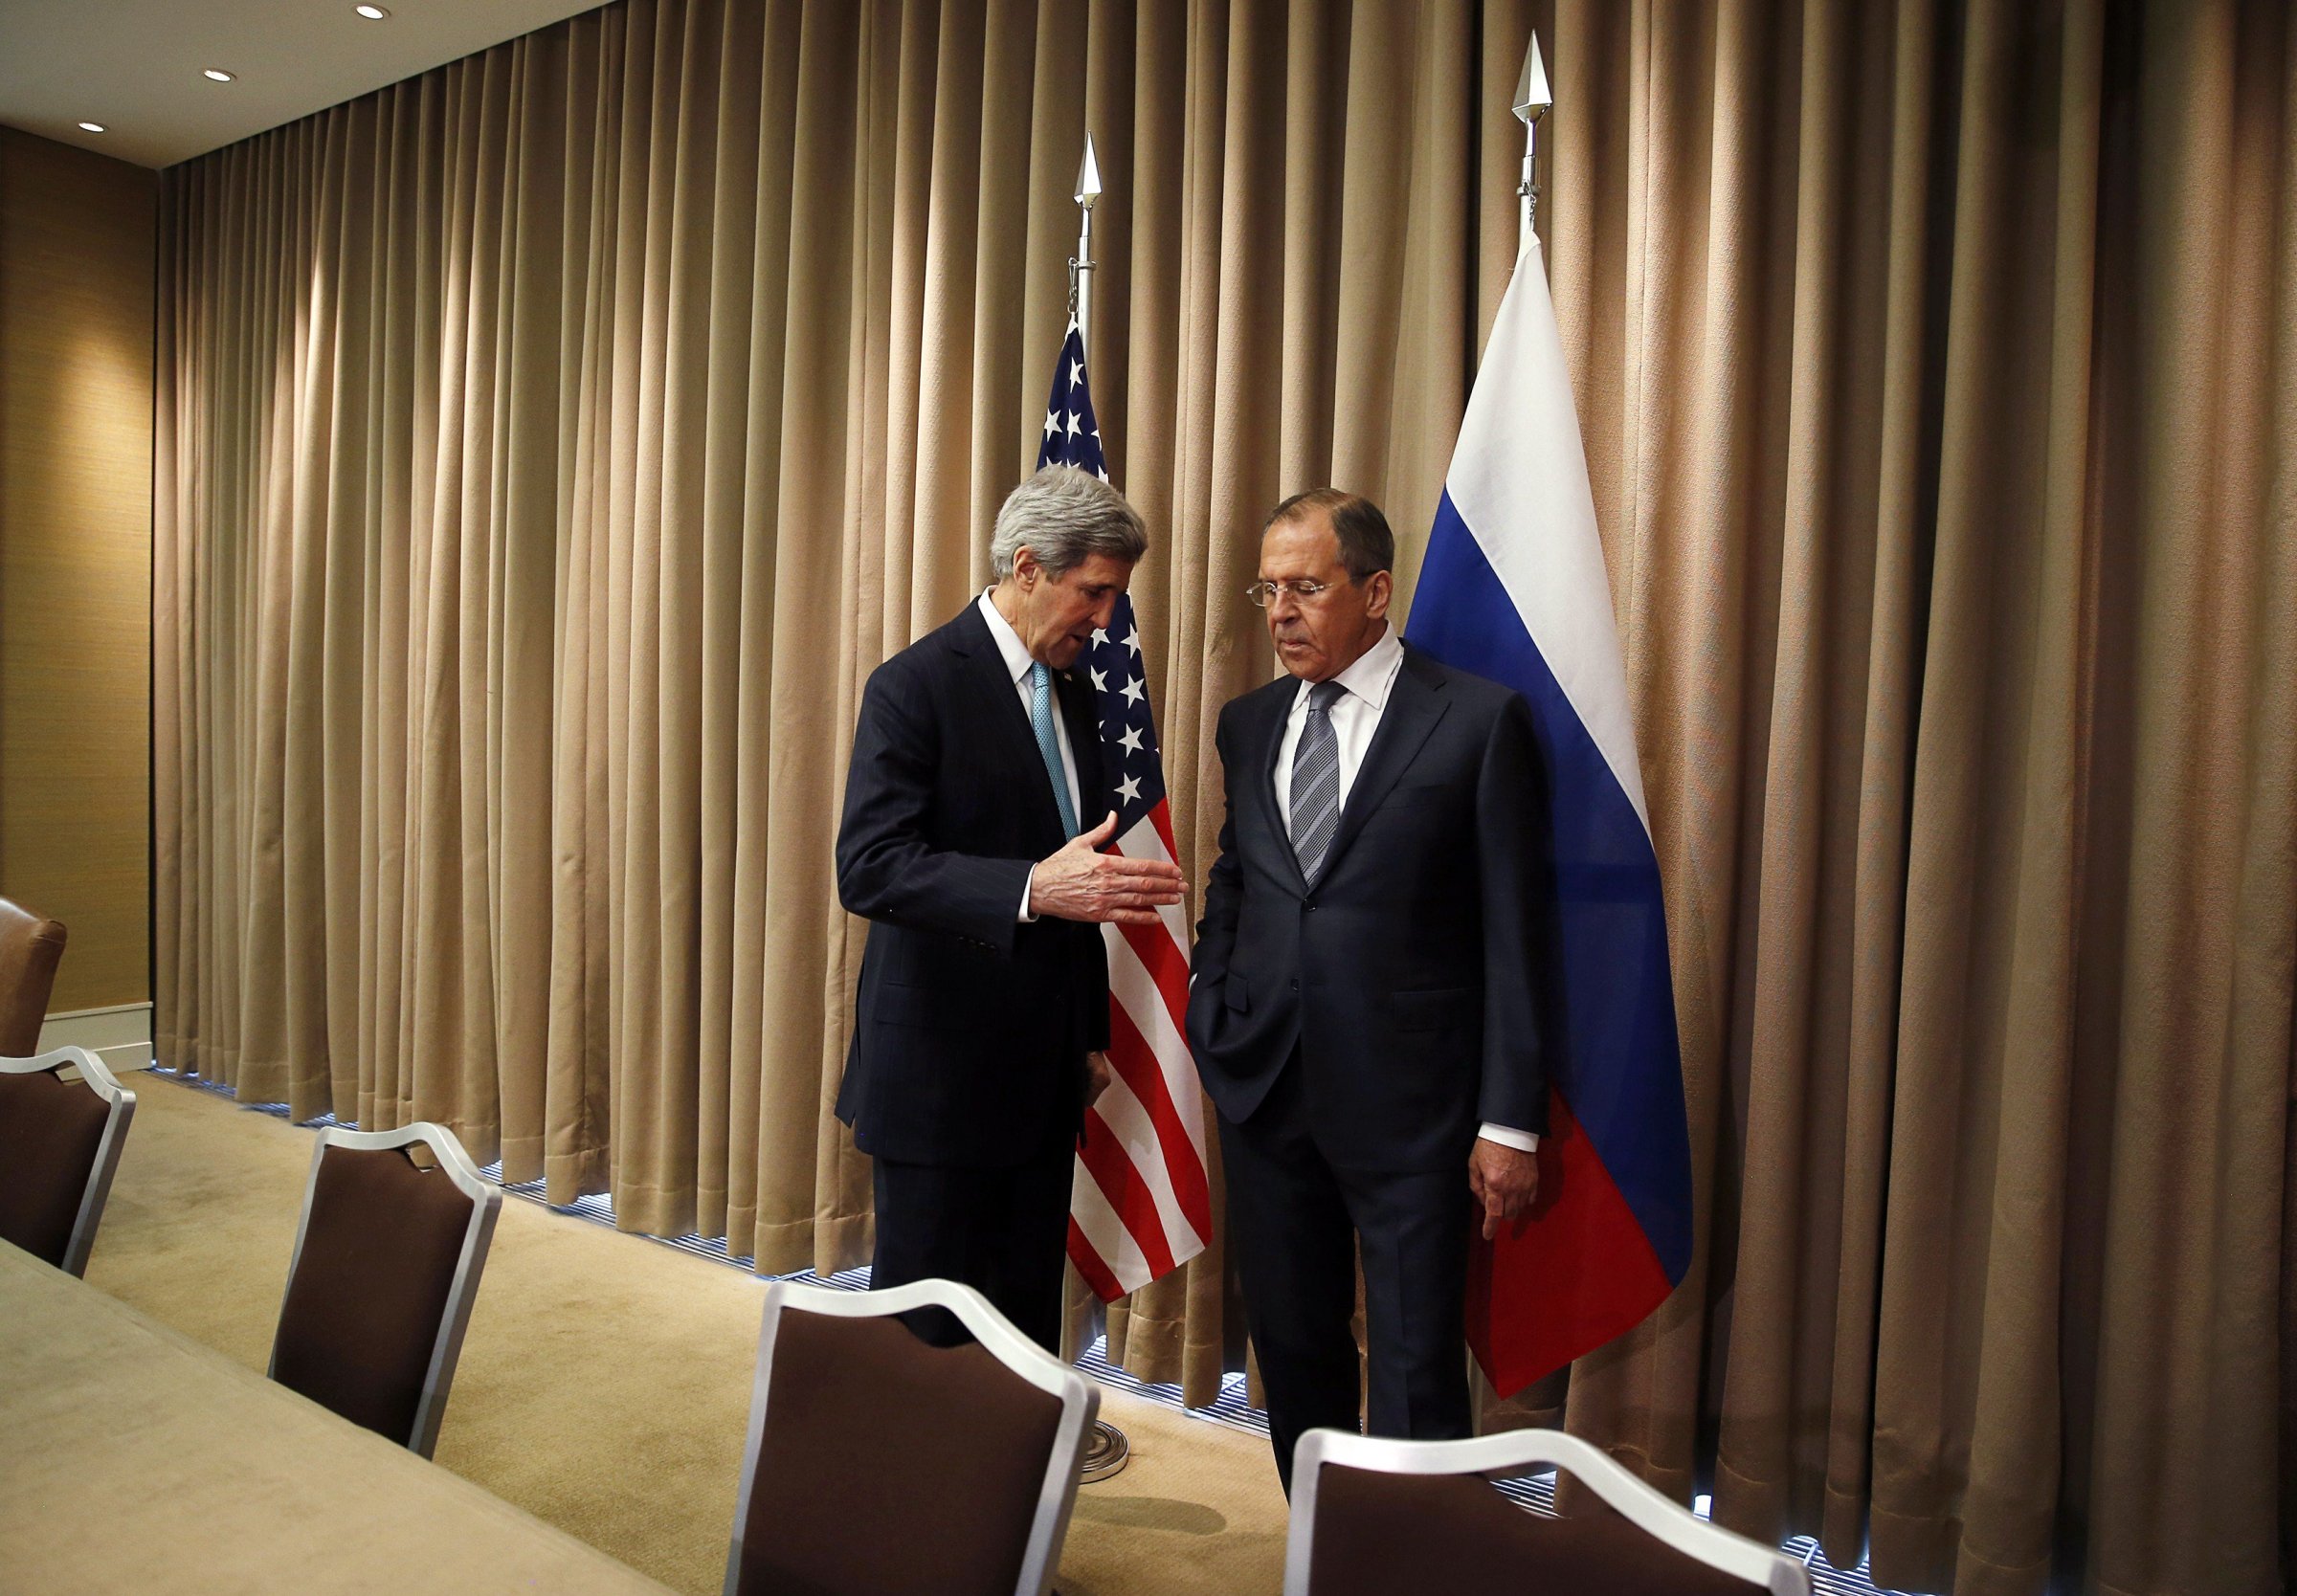 From left: U.S. Secretary of State John Kerry talks with Russian Foreign minister Sergei Lavrov at the start of a bilateral meeting to discuss the ongoing situation in Ukraine on April 17, 2014 in Geneva.